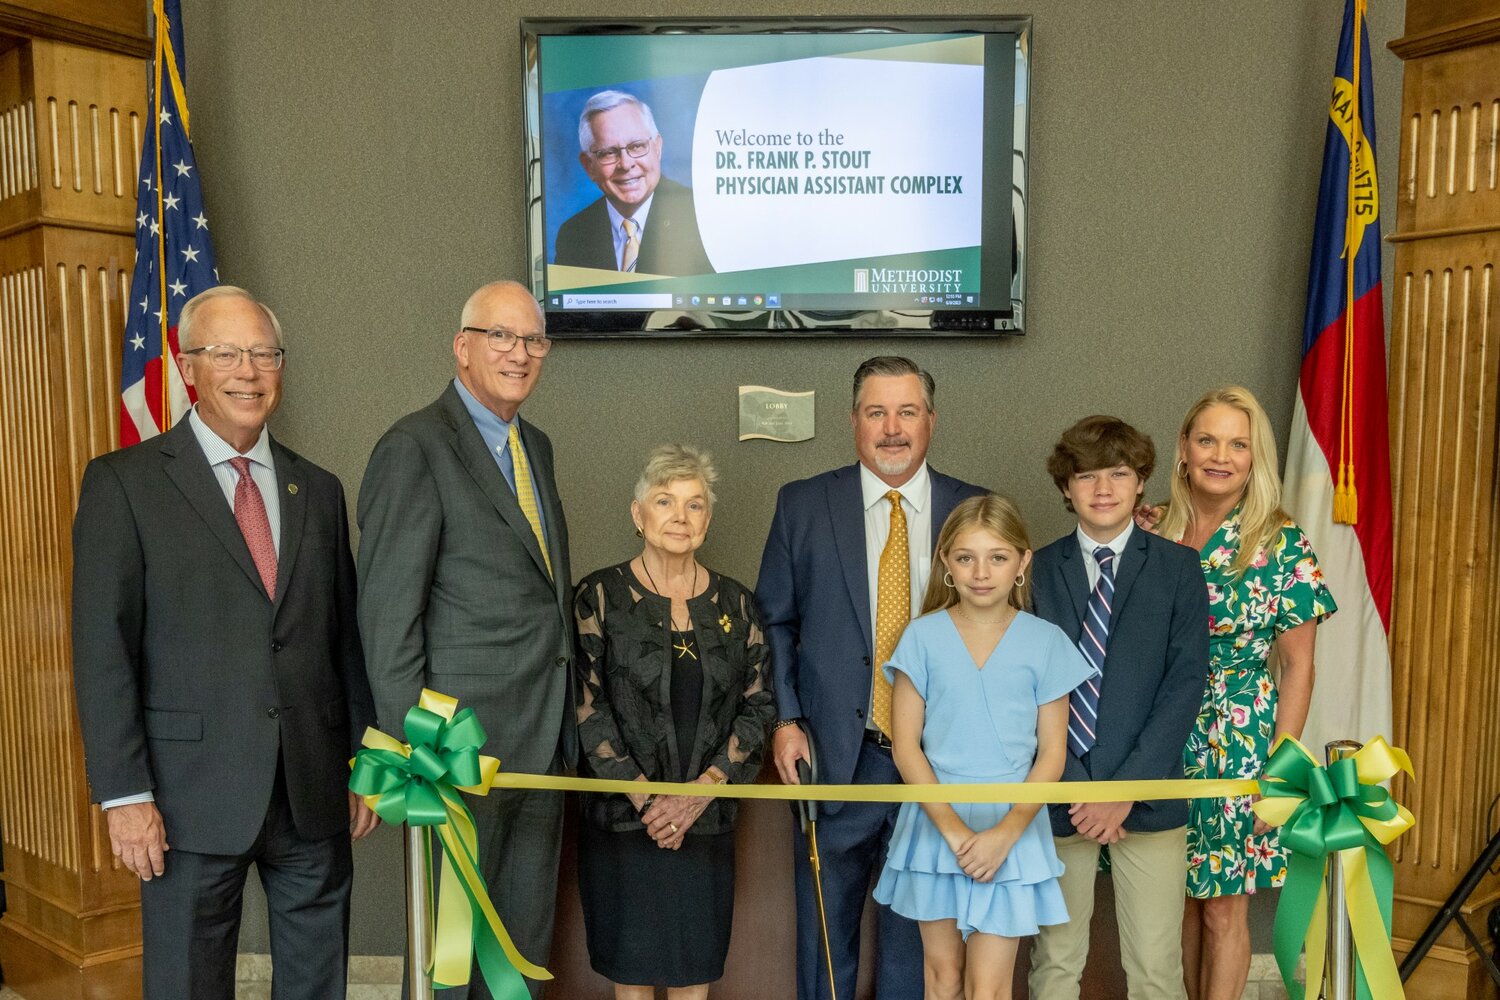 Tim Richardson, vice chairman of the Methodist University board of trustees, left, and university President Stanley Wearden stand with members of the Stout family during a dedication of the Dr. Frank P. Stout Physician Assistant Complex. Stout's widow, Carol Stout, is shown with their son, Cam Stout; granddaughter, Cameron Stout; grandson, Craven Stout; and daughter-in-law, Kelly Stout.